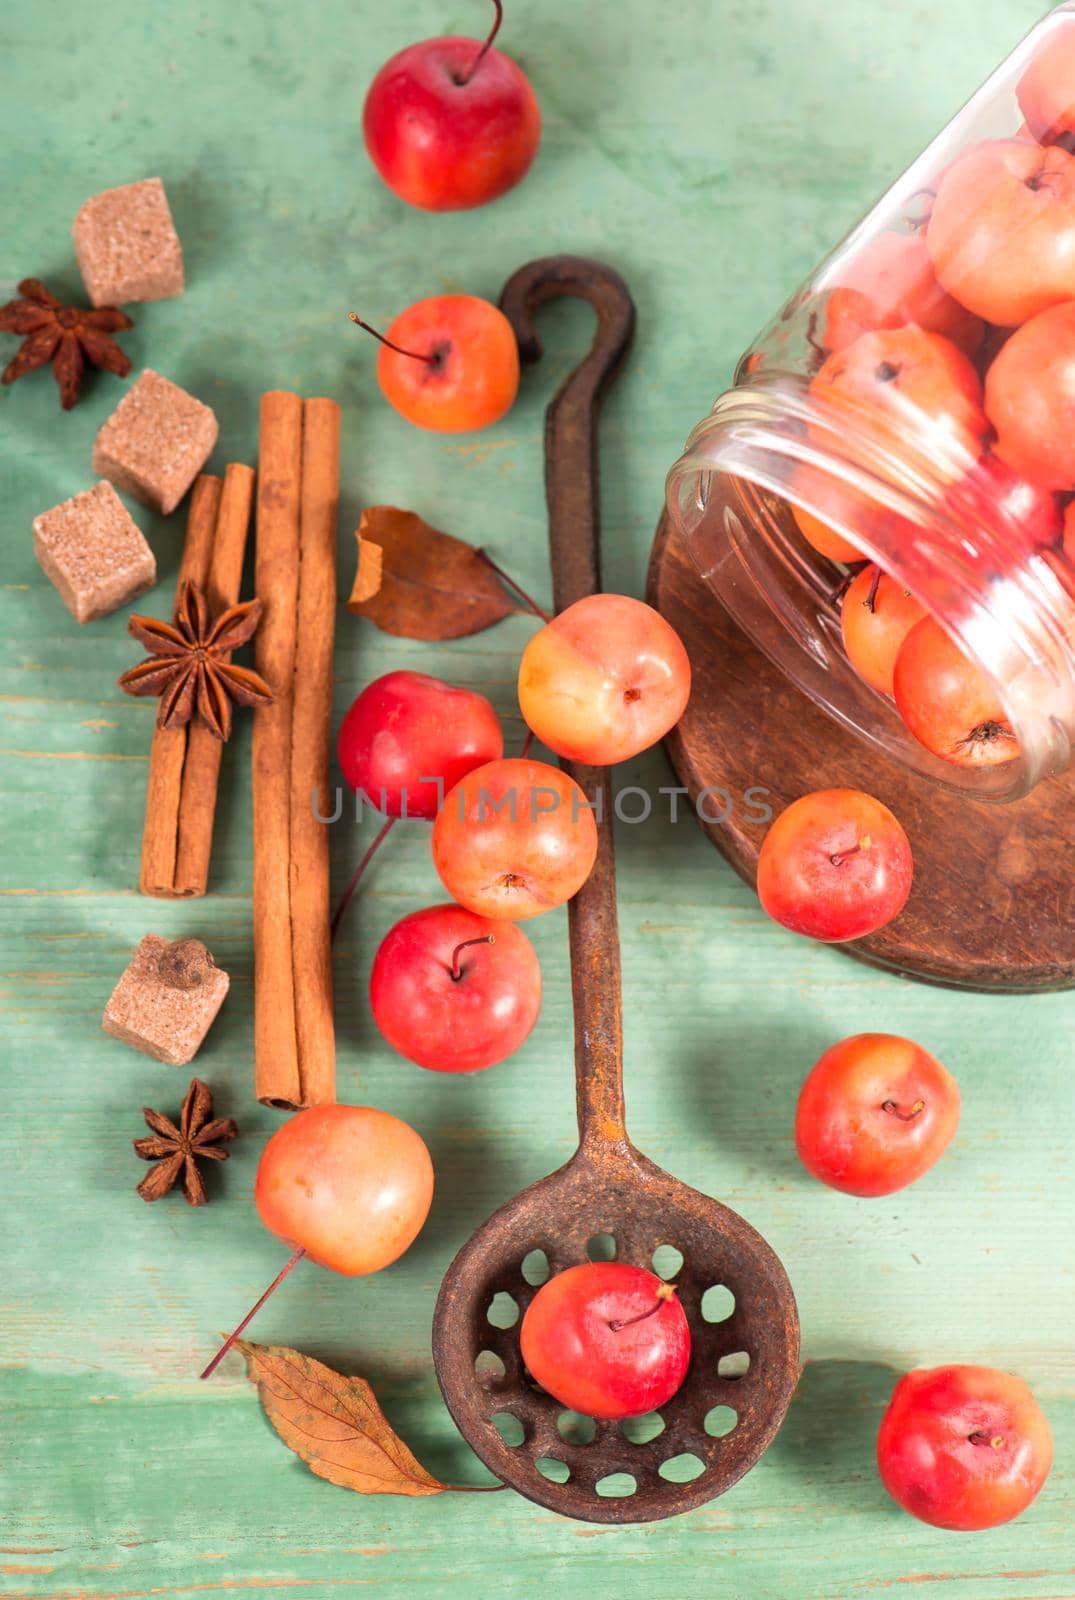 paradise apples, on the wooden table in the rustic style, iron mug